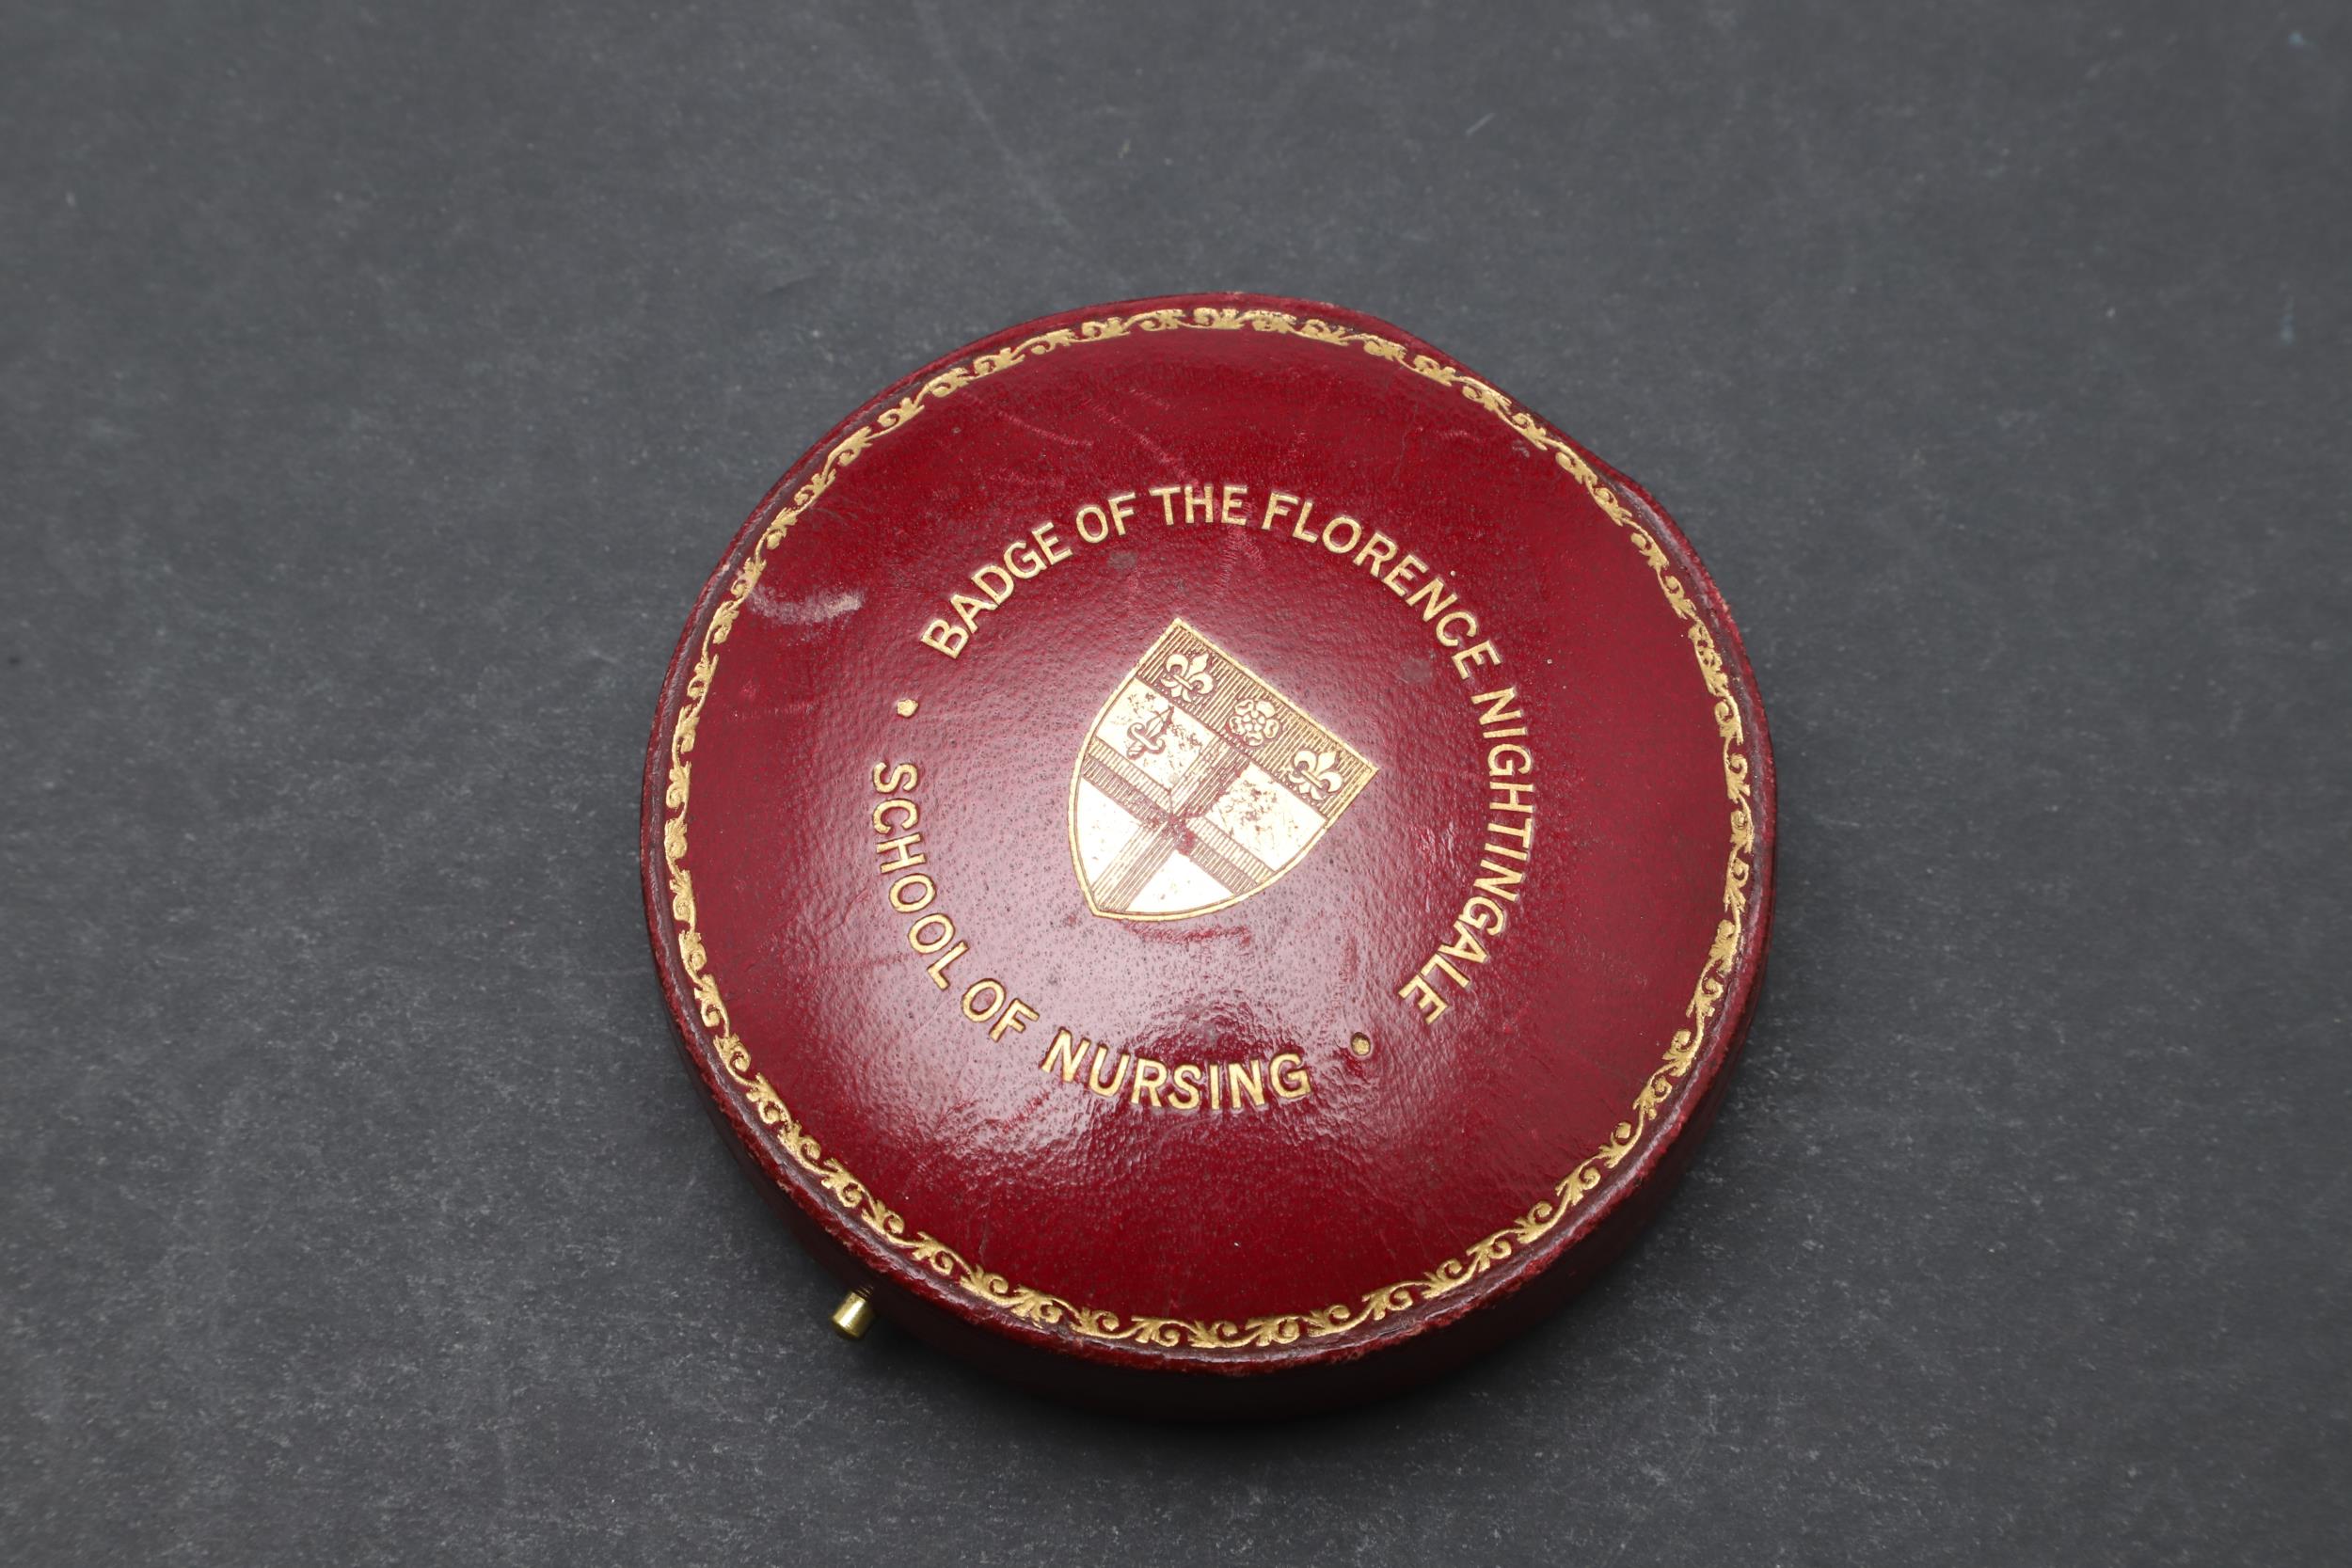 THE BADGE OF THE FLORENCE NIGHTINGALE SCHOOL OF NURSING. - Image 5 of 8